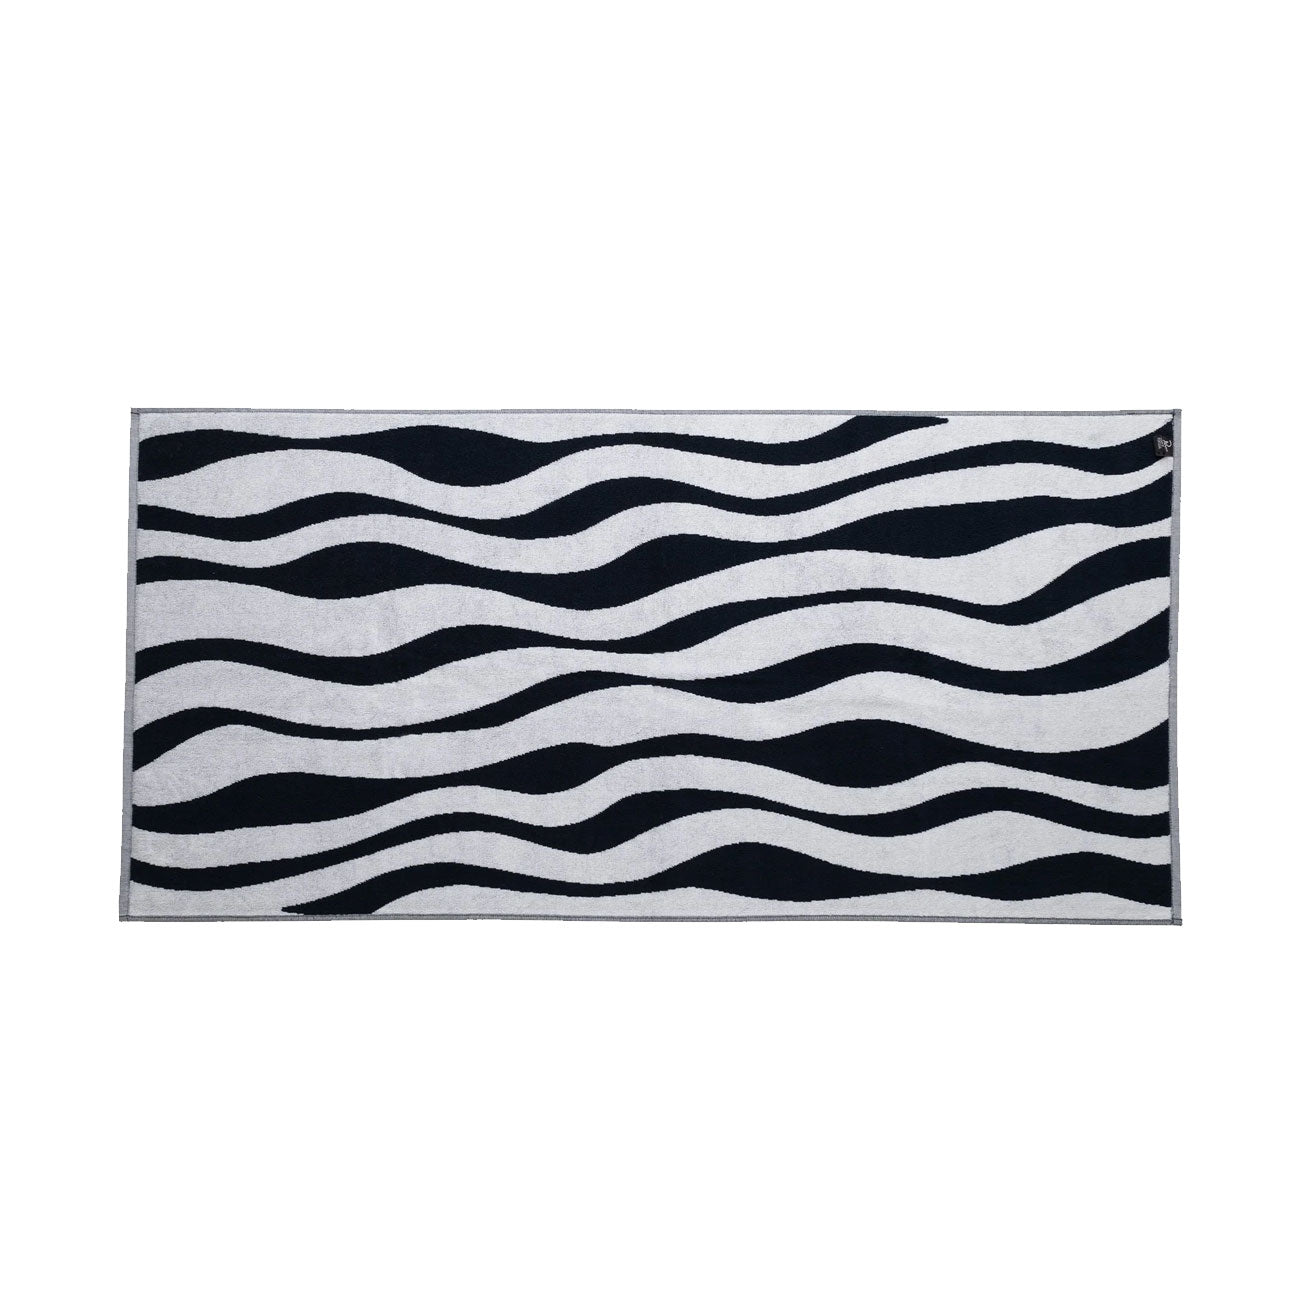 by Parra Waves Of The Navy Bath Towel (Navy / Weiß)  - Allike Store